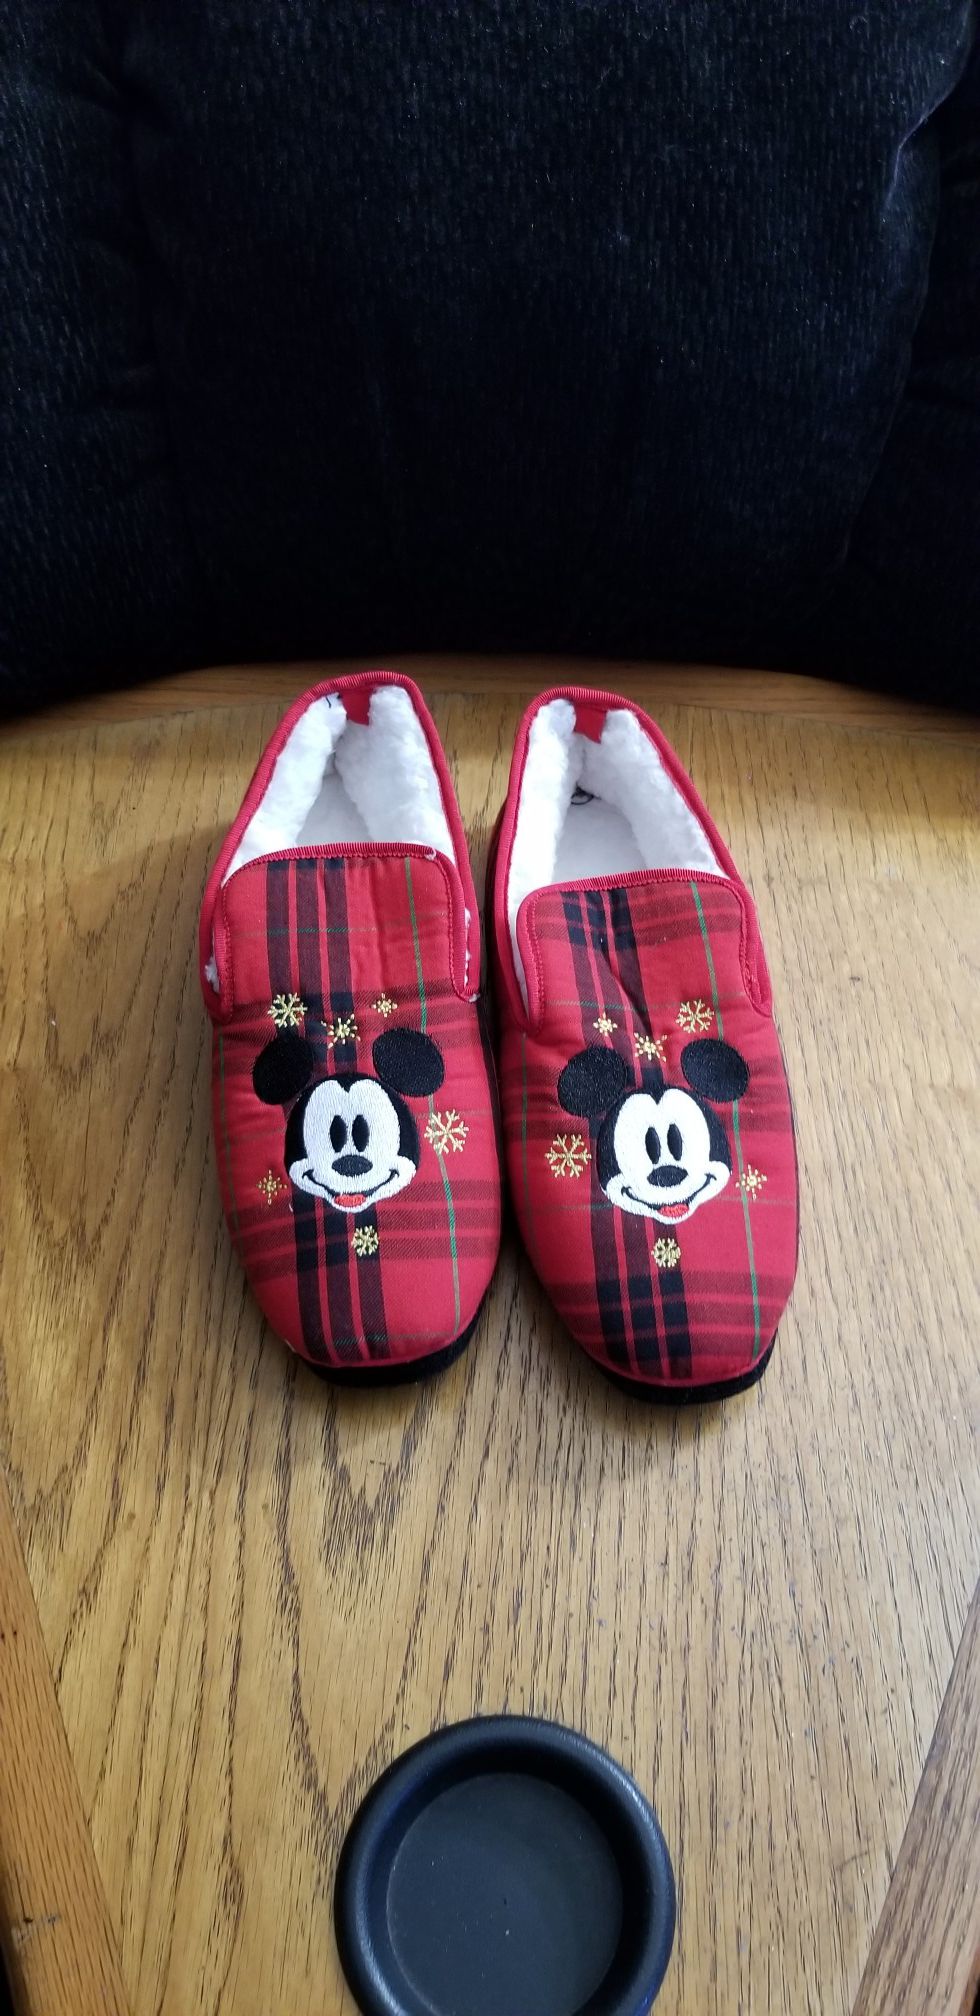 NEW Mickey Mouse Holiday Soft Slippers Shoes. Women's size 8